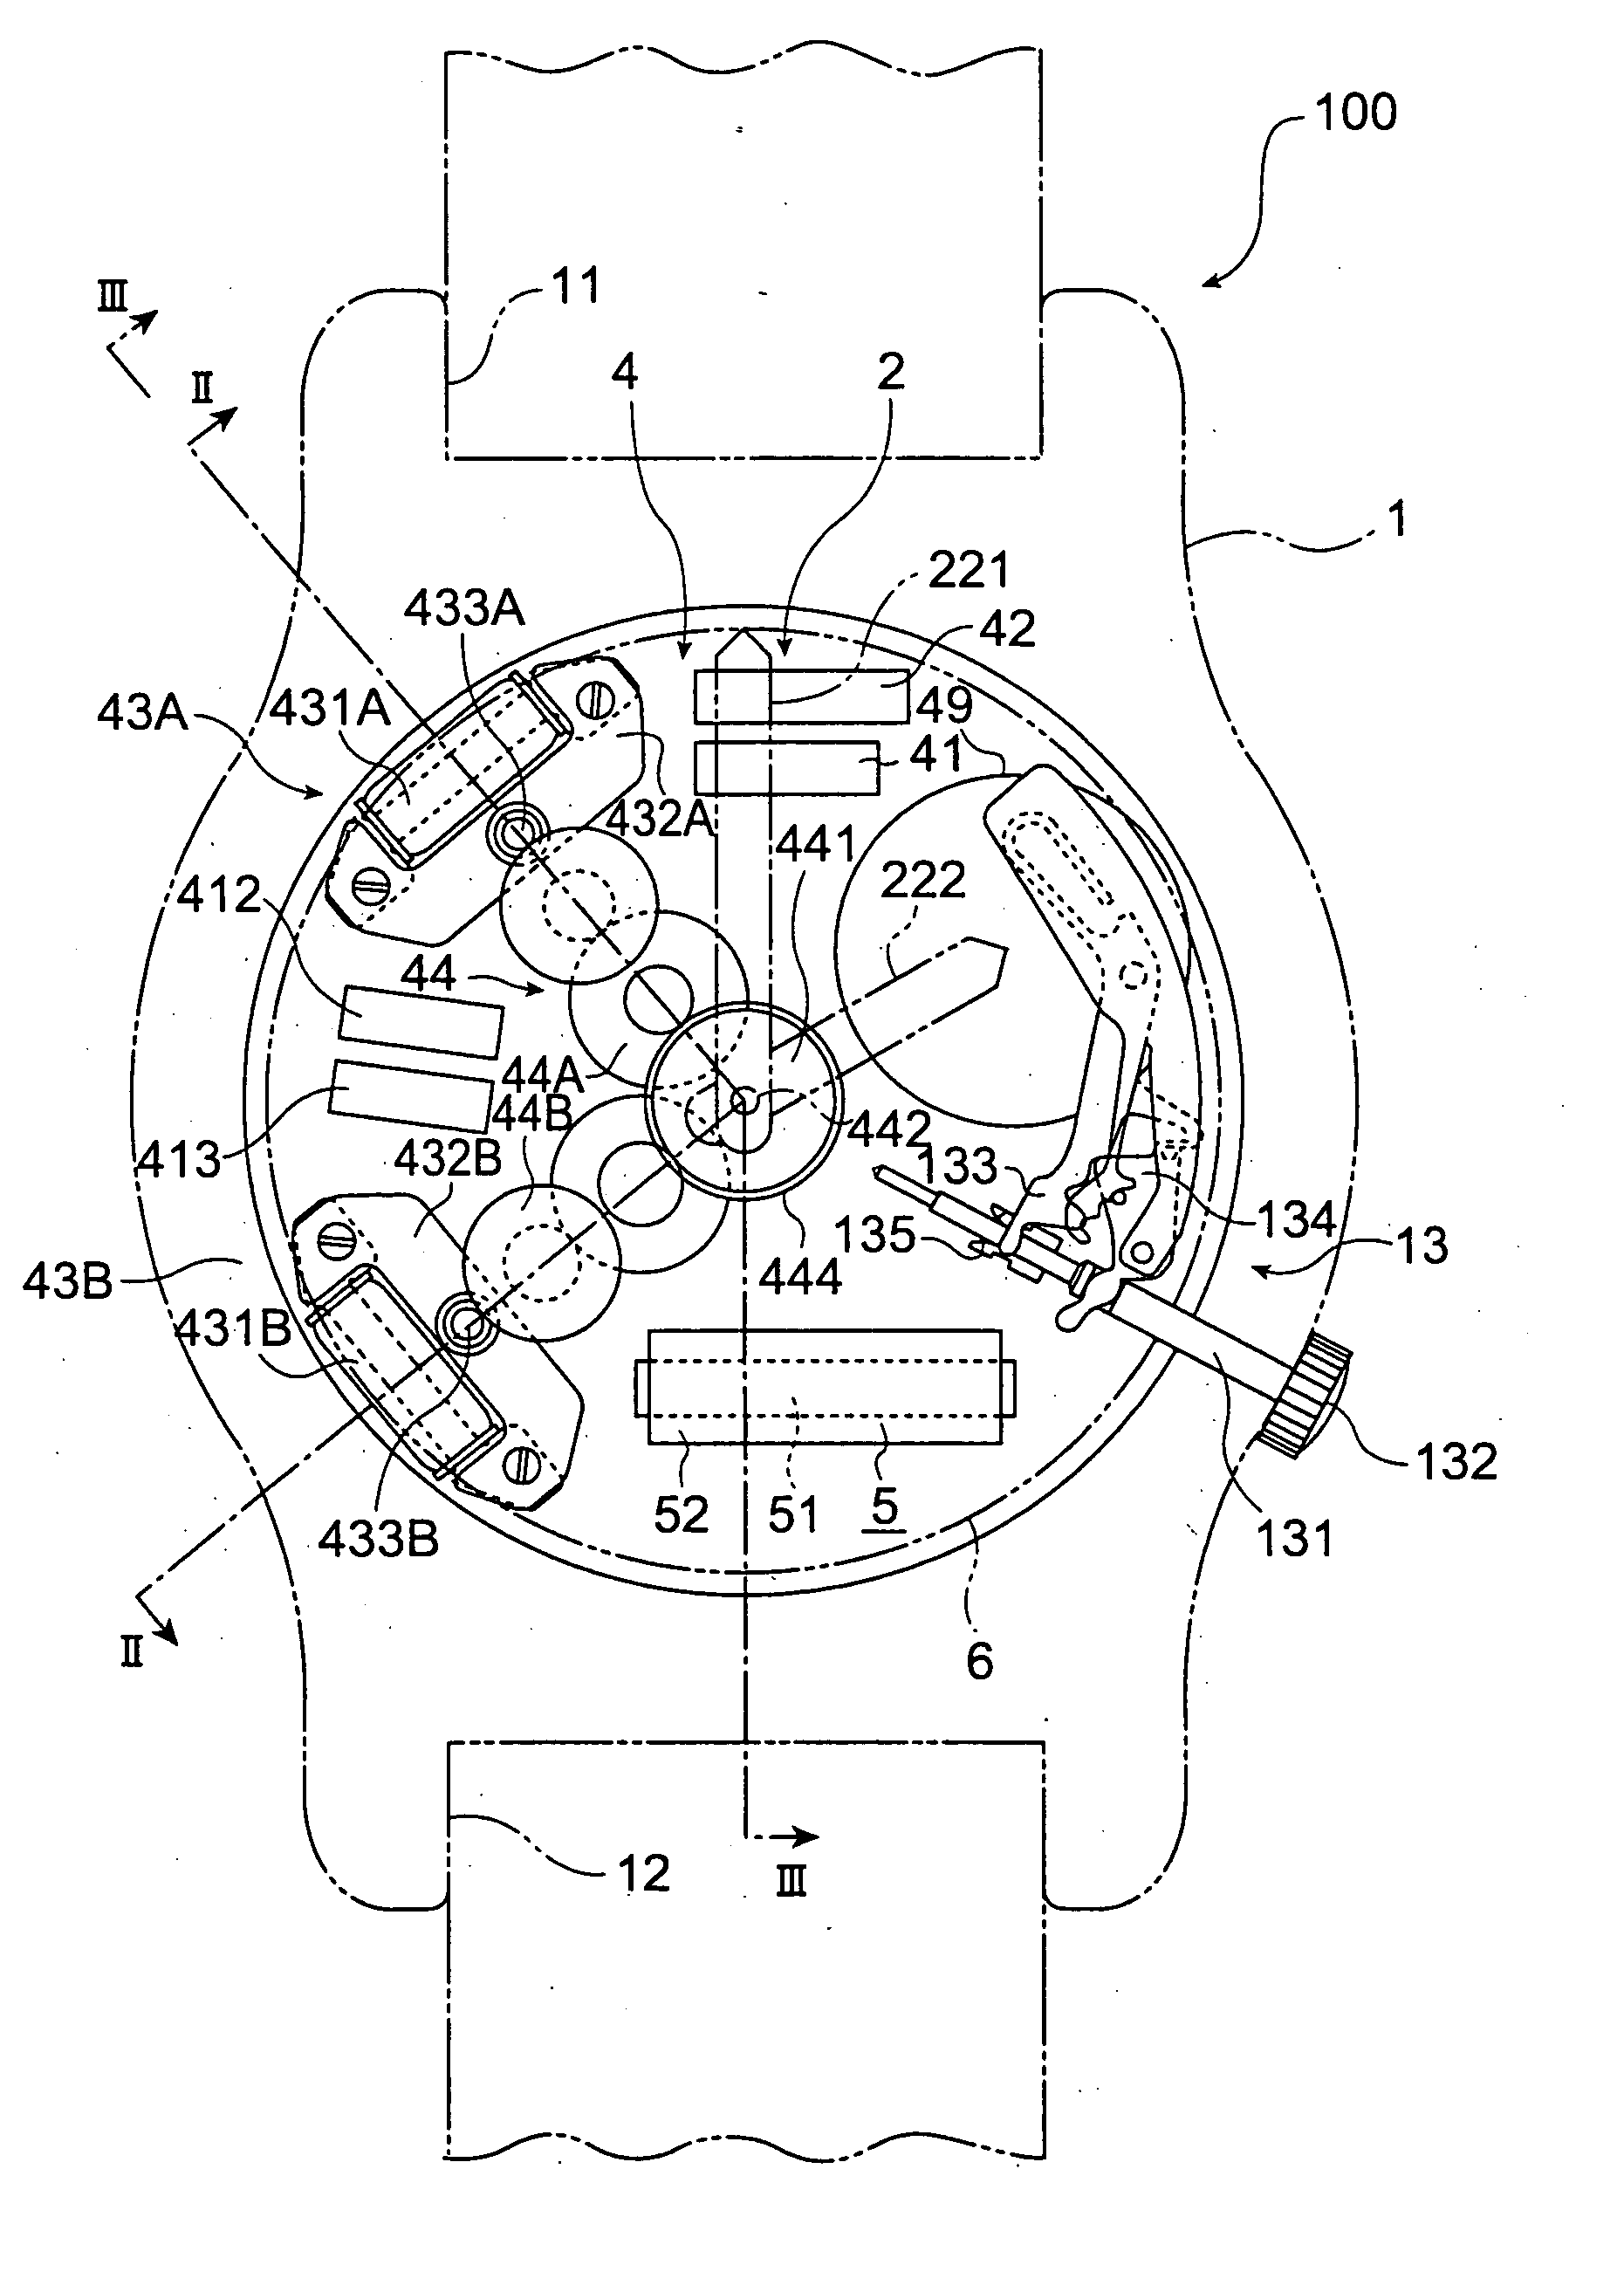 Electric watch with radio communication function